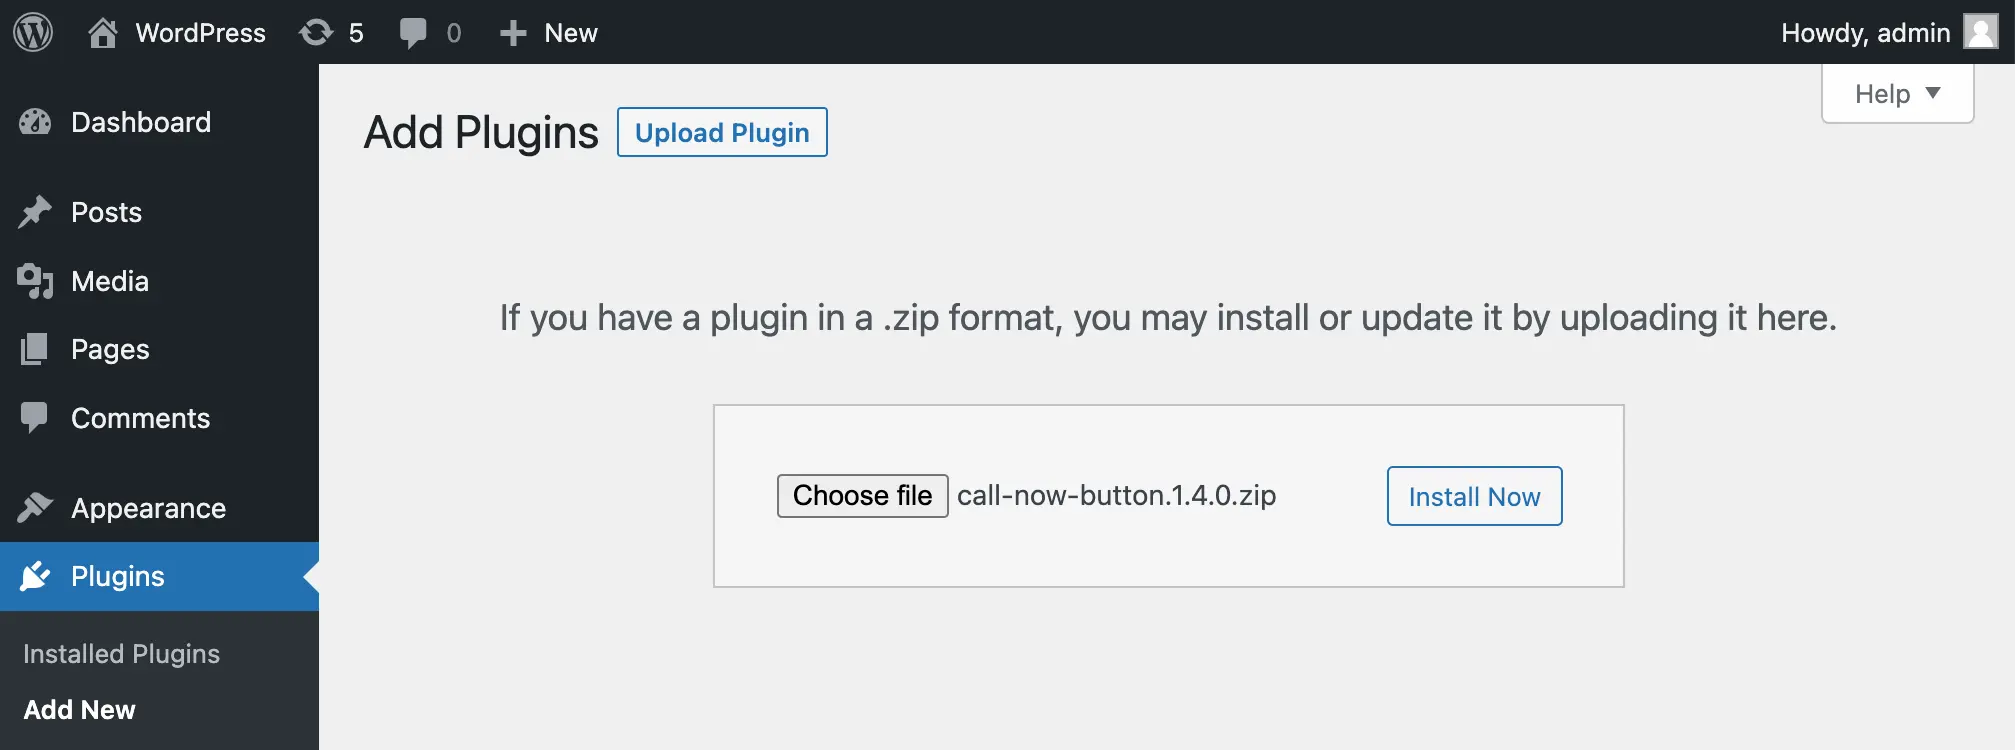 Add a click to call button to your website in WordPress - manual plugin installation